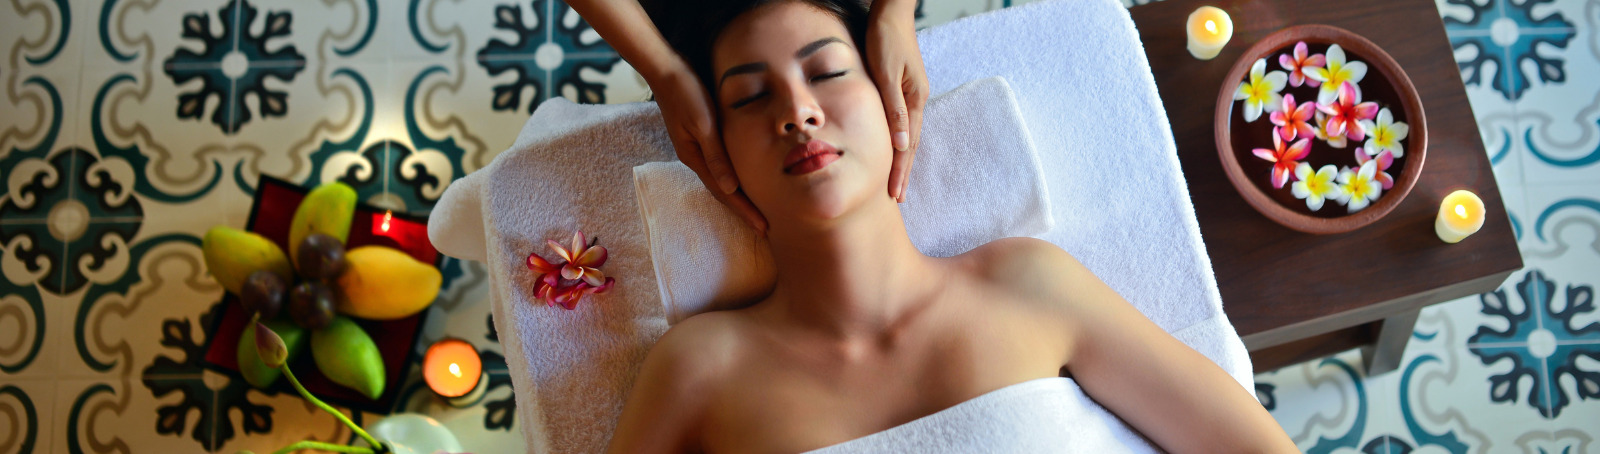 Top 10 Luxury Spa Experiences in the United States